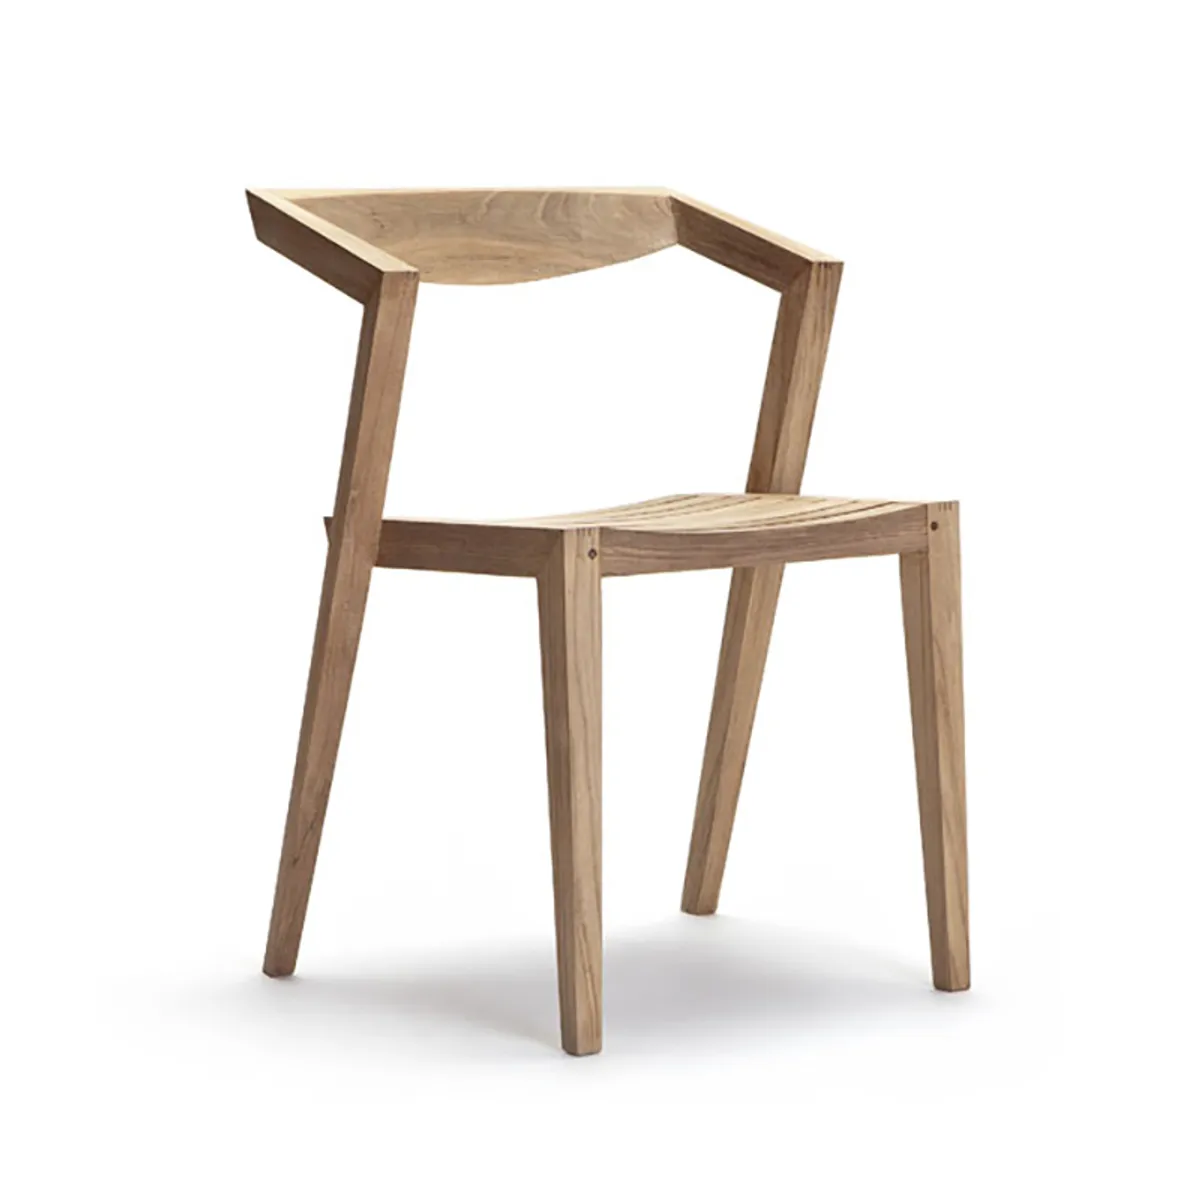 Borough Side Chair Stacking Outdoor Furniture In Teak Wood 075